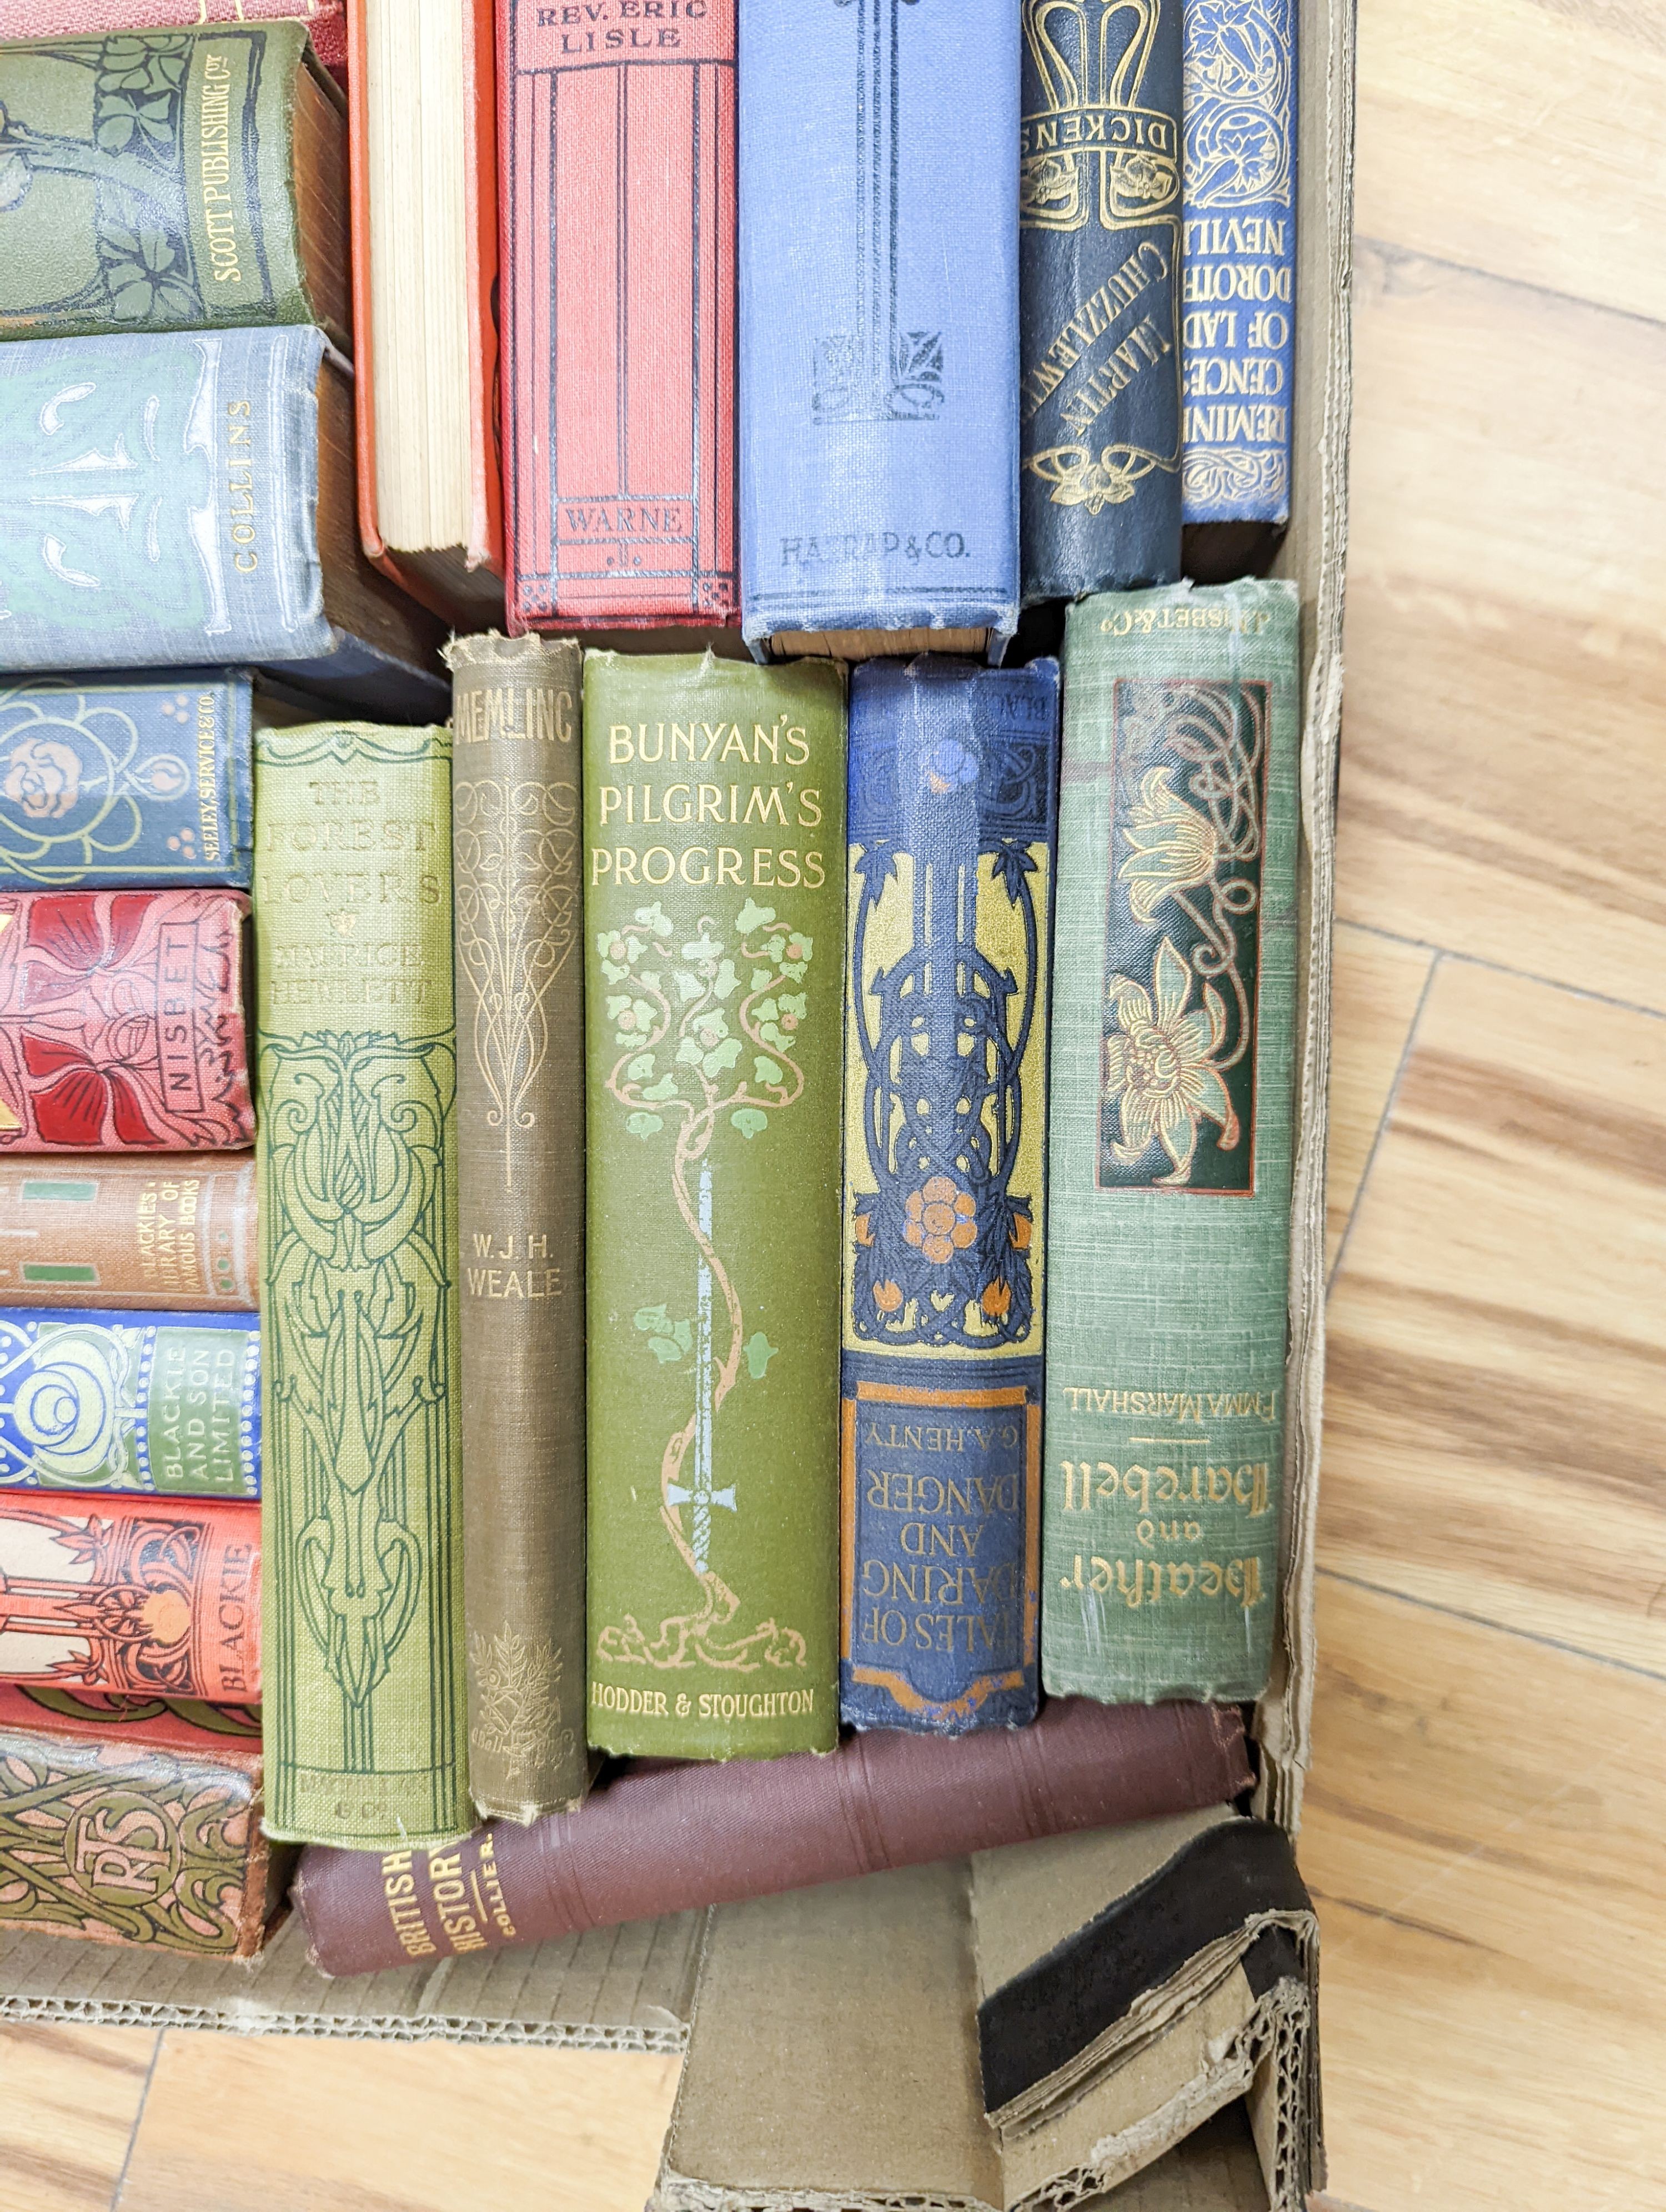 A collection of 33 late 19th/early 20th century works with Art Nouveau decorated bindings, consisting of poetry and fiction.